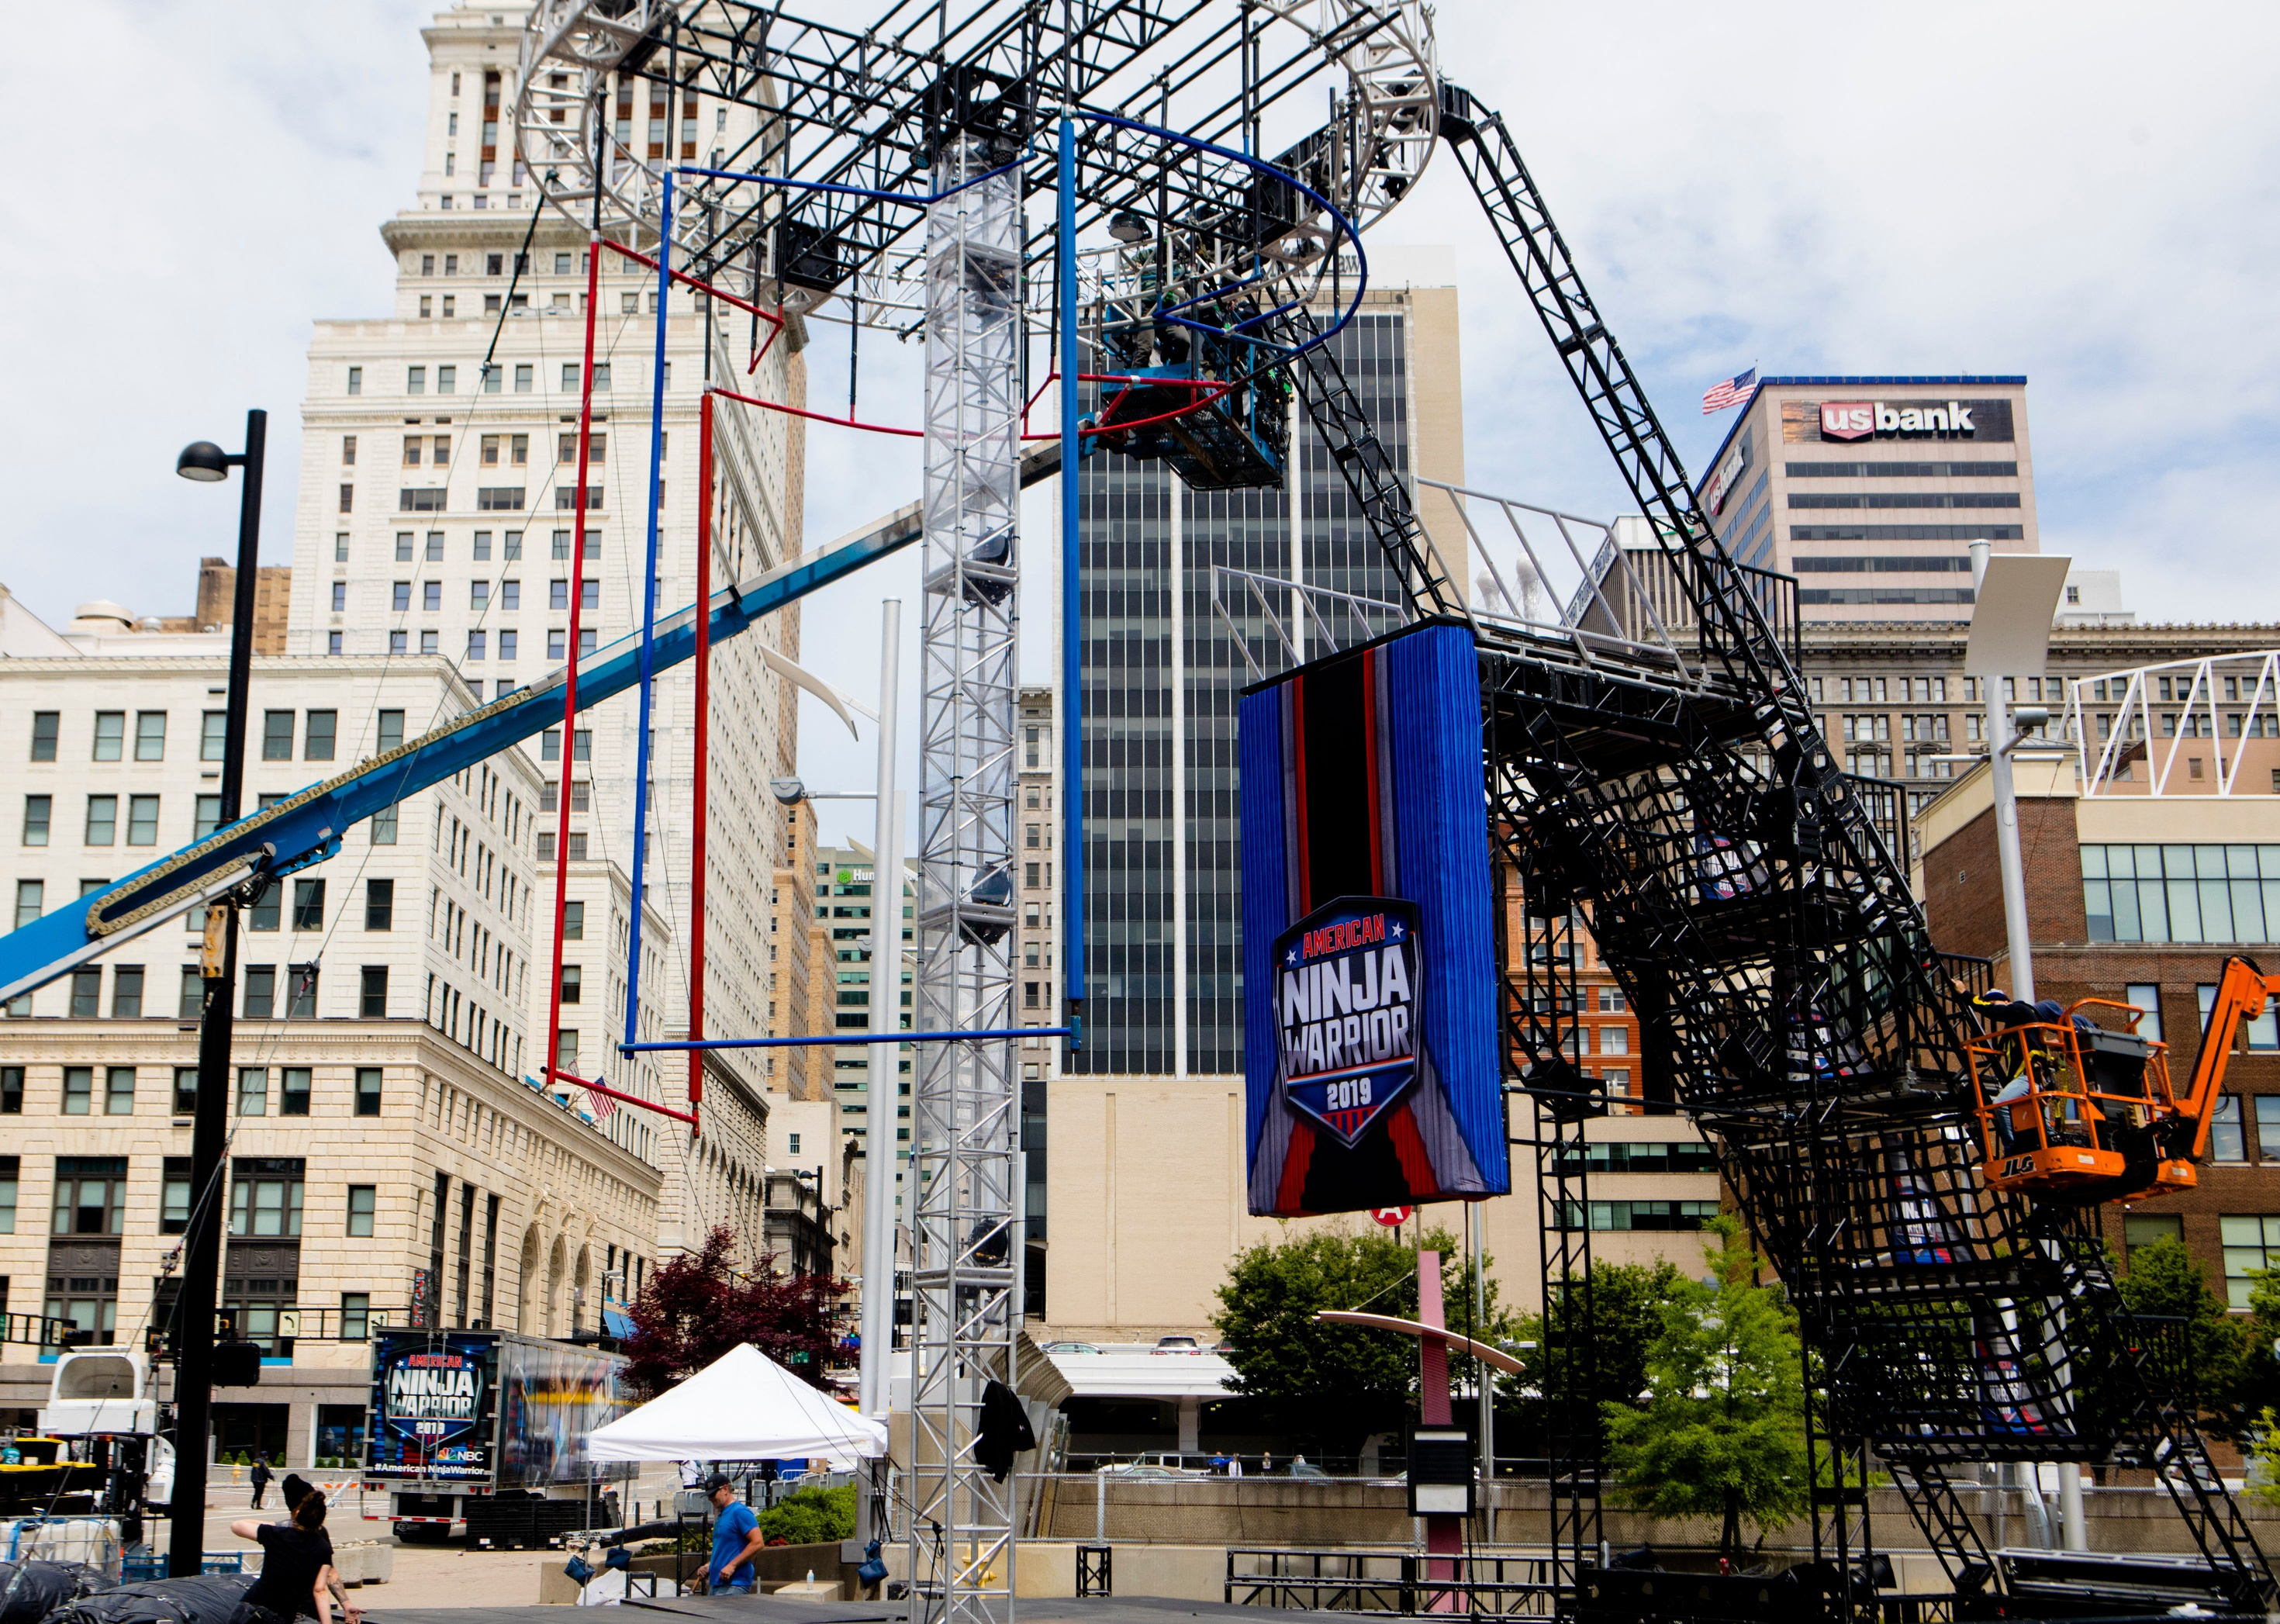 Michael "The Stallion" Silenzi is representing Chicago in the America Ninja Warrior finals Monday, August 30!